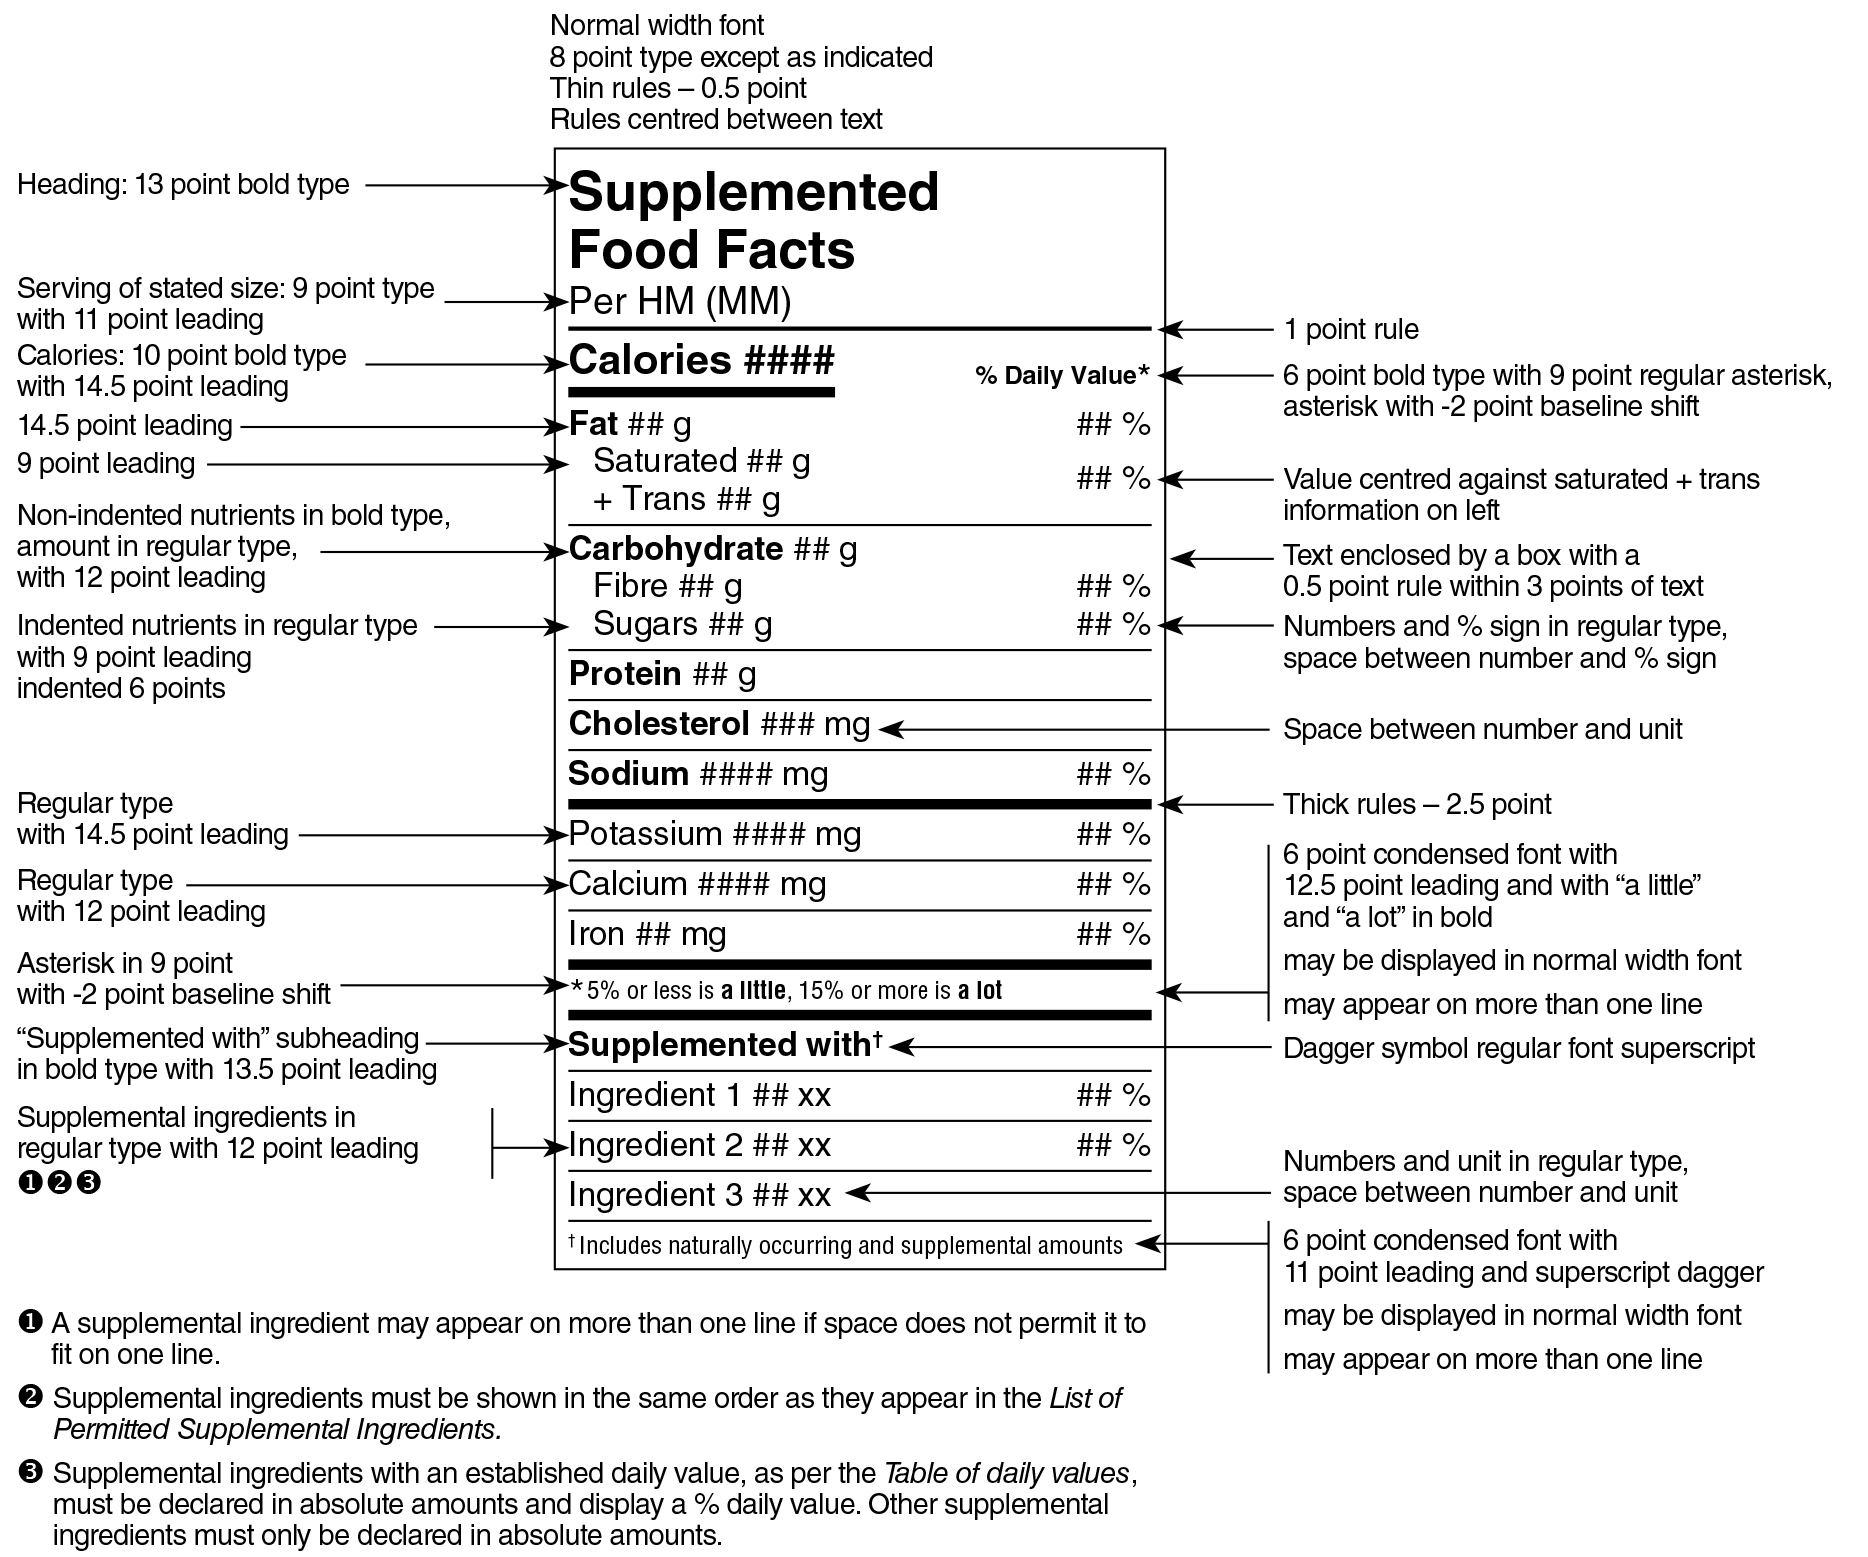 An English Supplemented Food Facts table in standard format surrounded by specifications. Text version below.